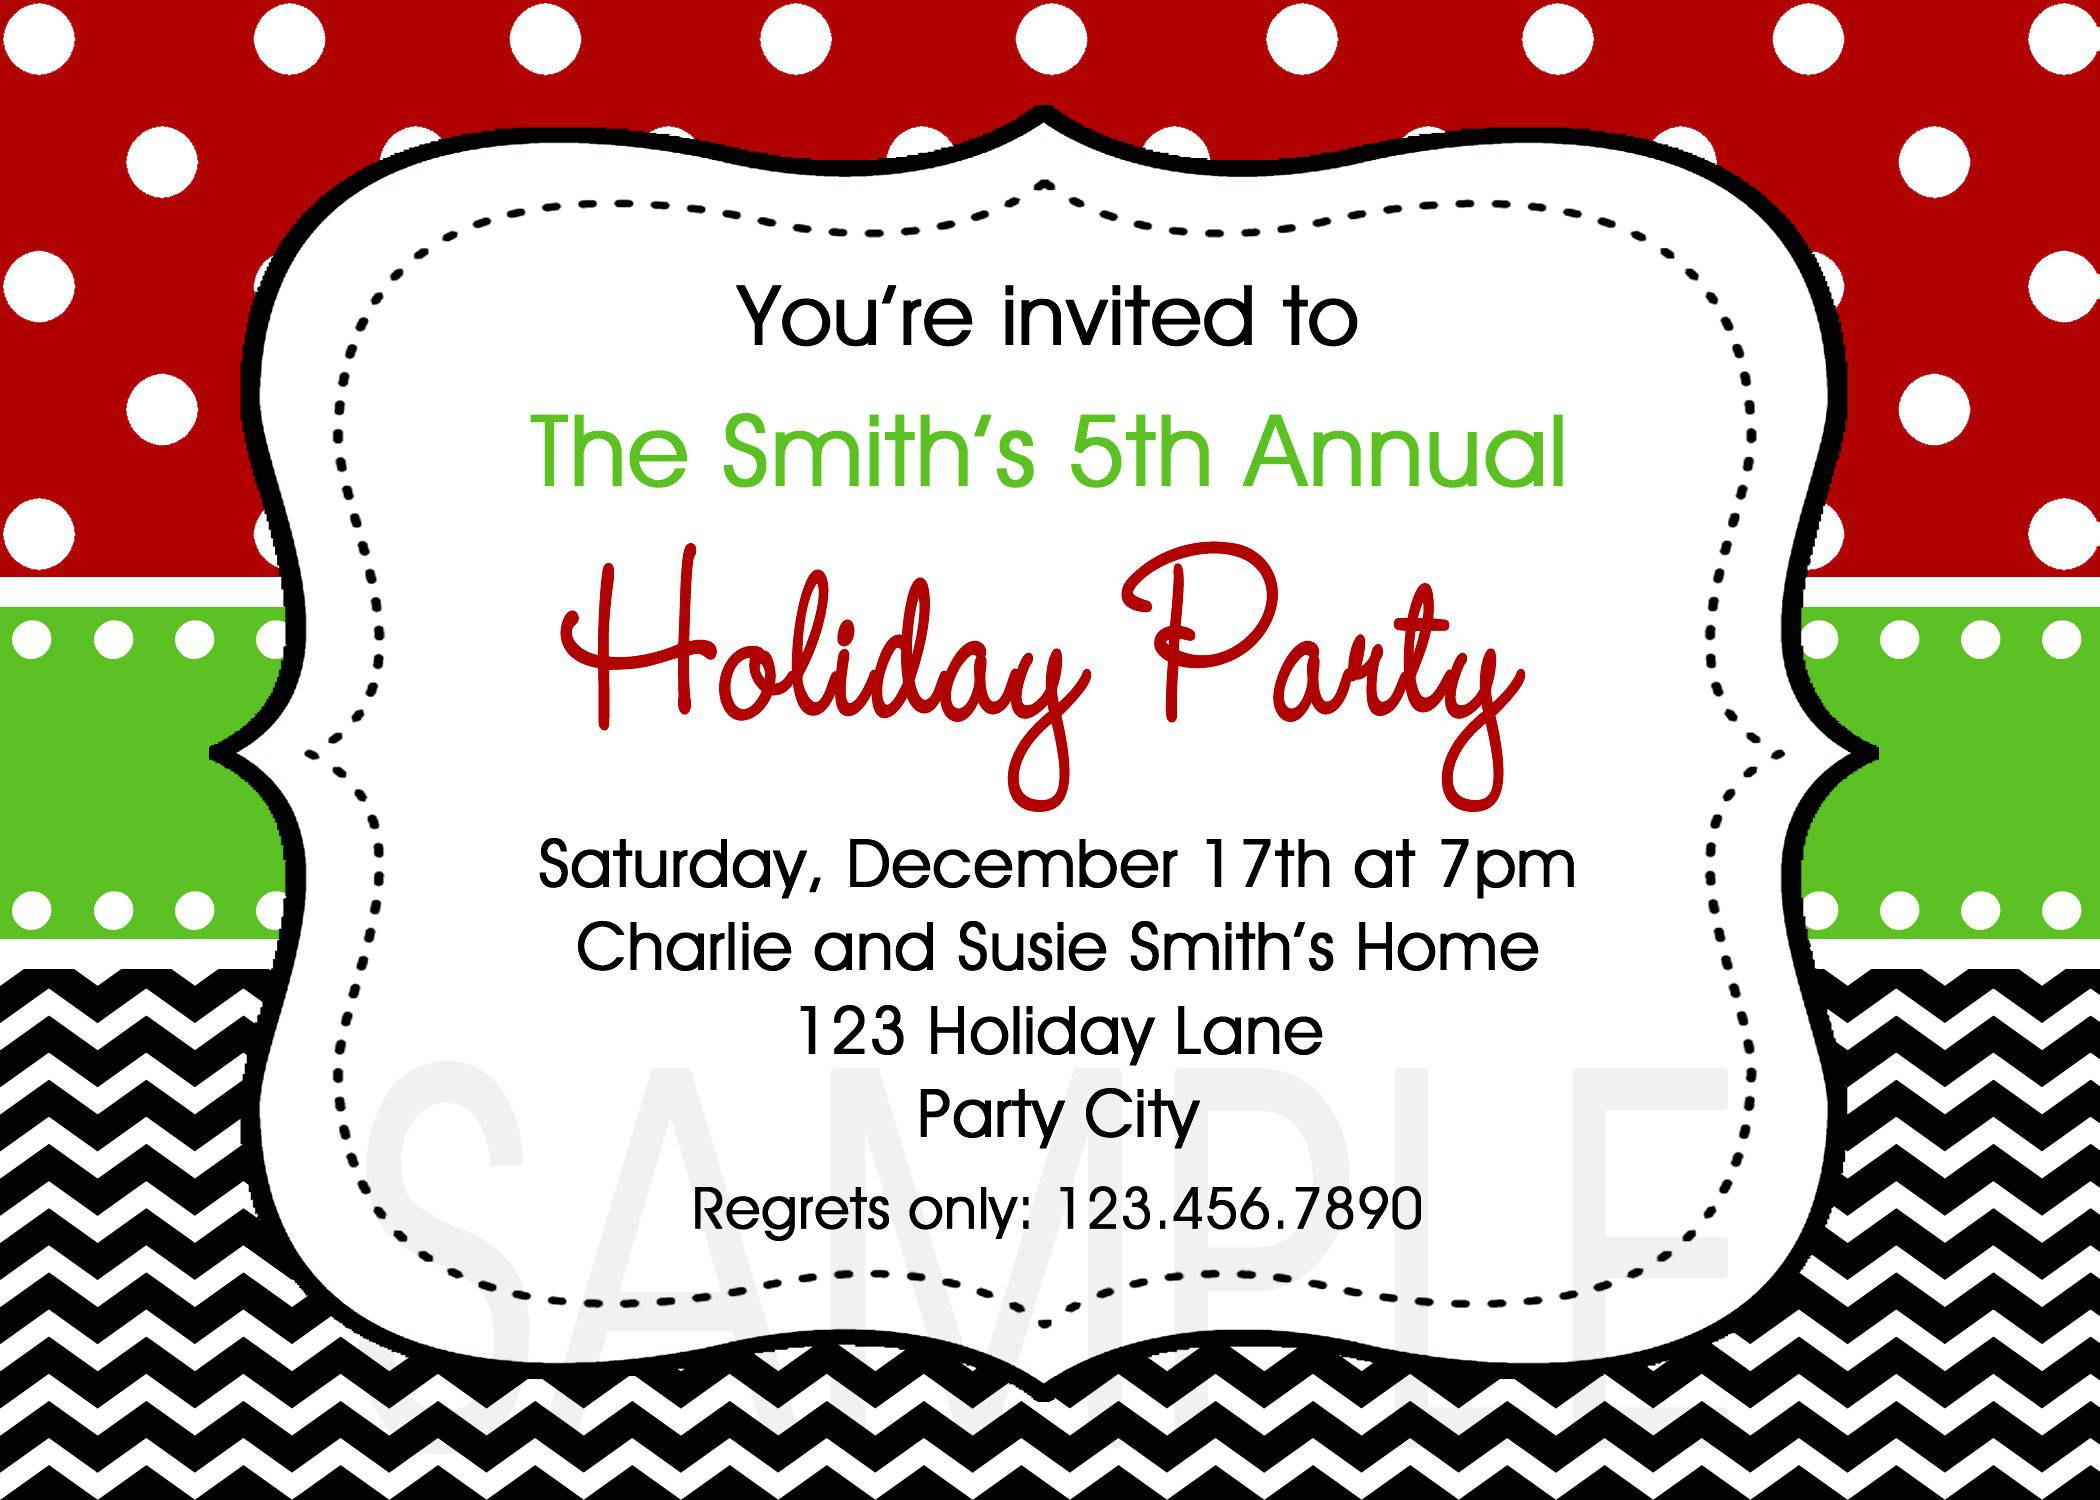 009 Email Christmas Party Invites Re Mendation Best Ideas Of Invite within size 2100 X 1500